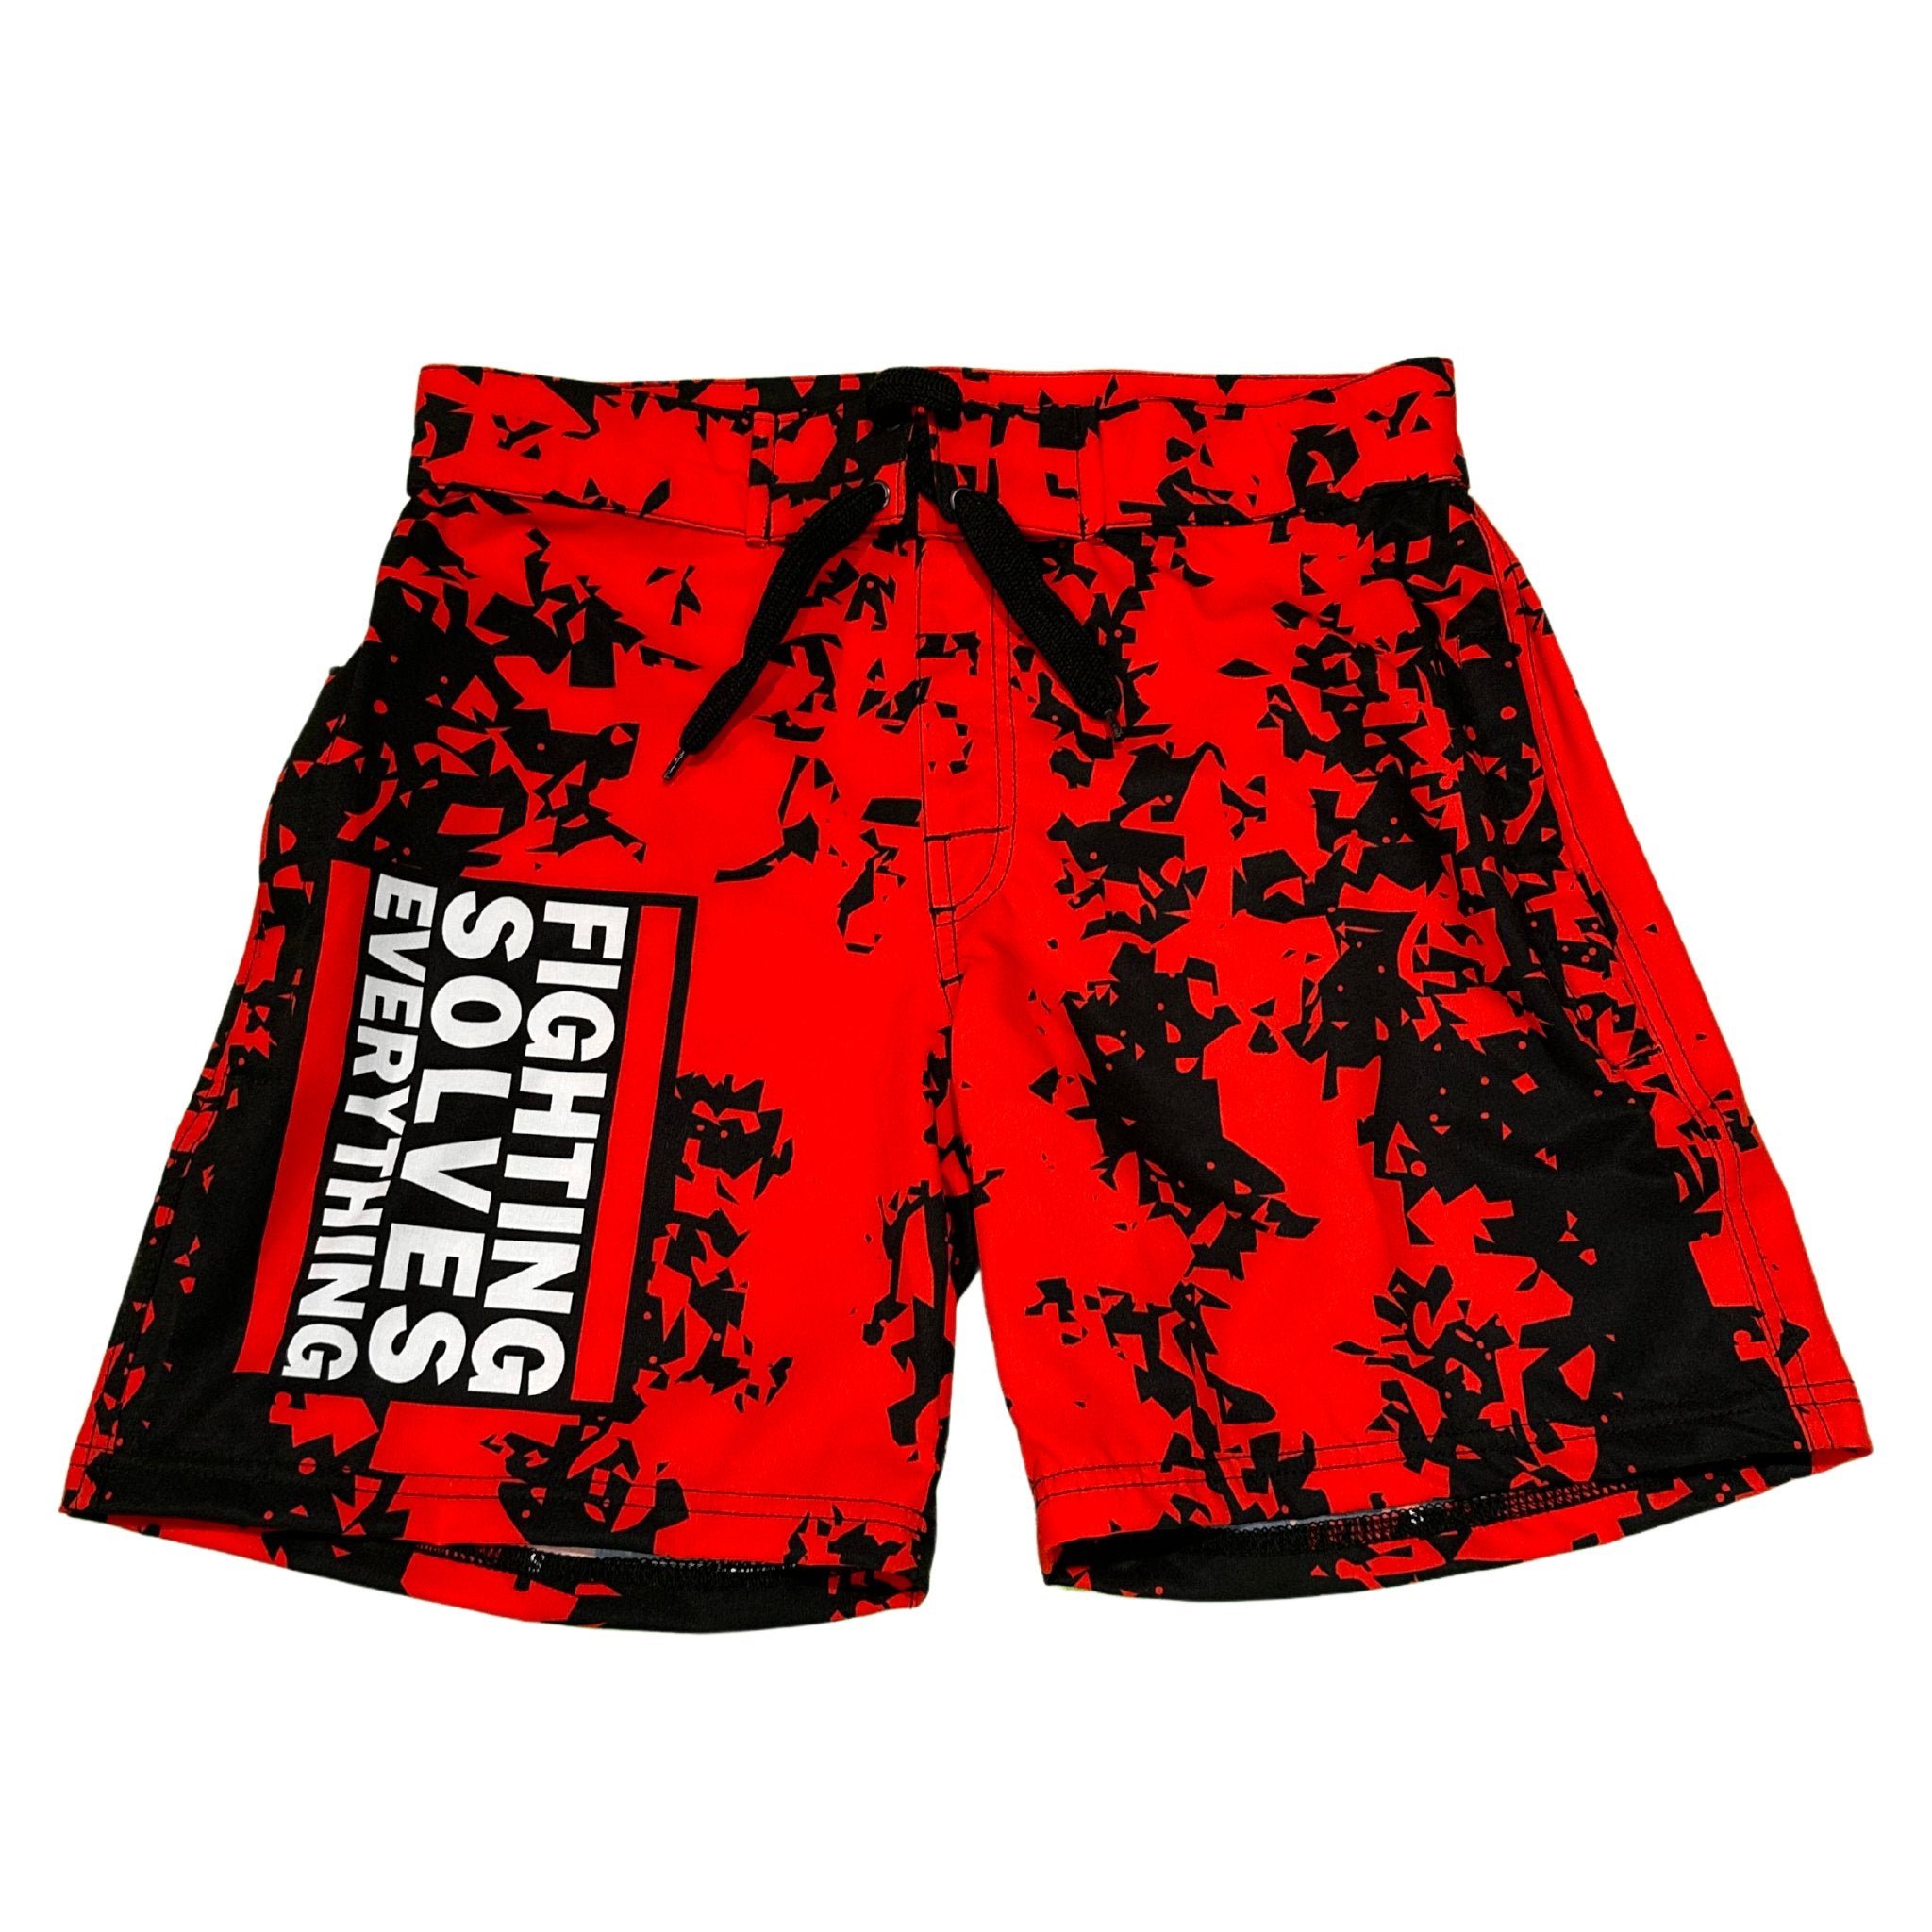 Gasp Thermal Shorts Red Camo – Legend7sports